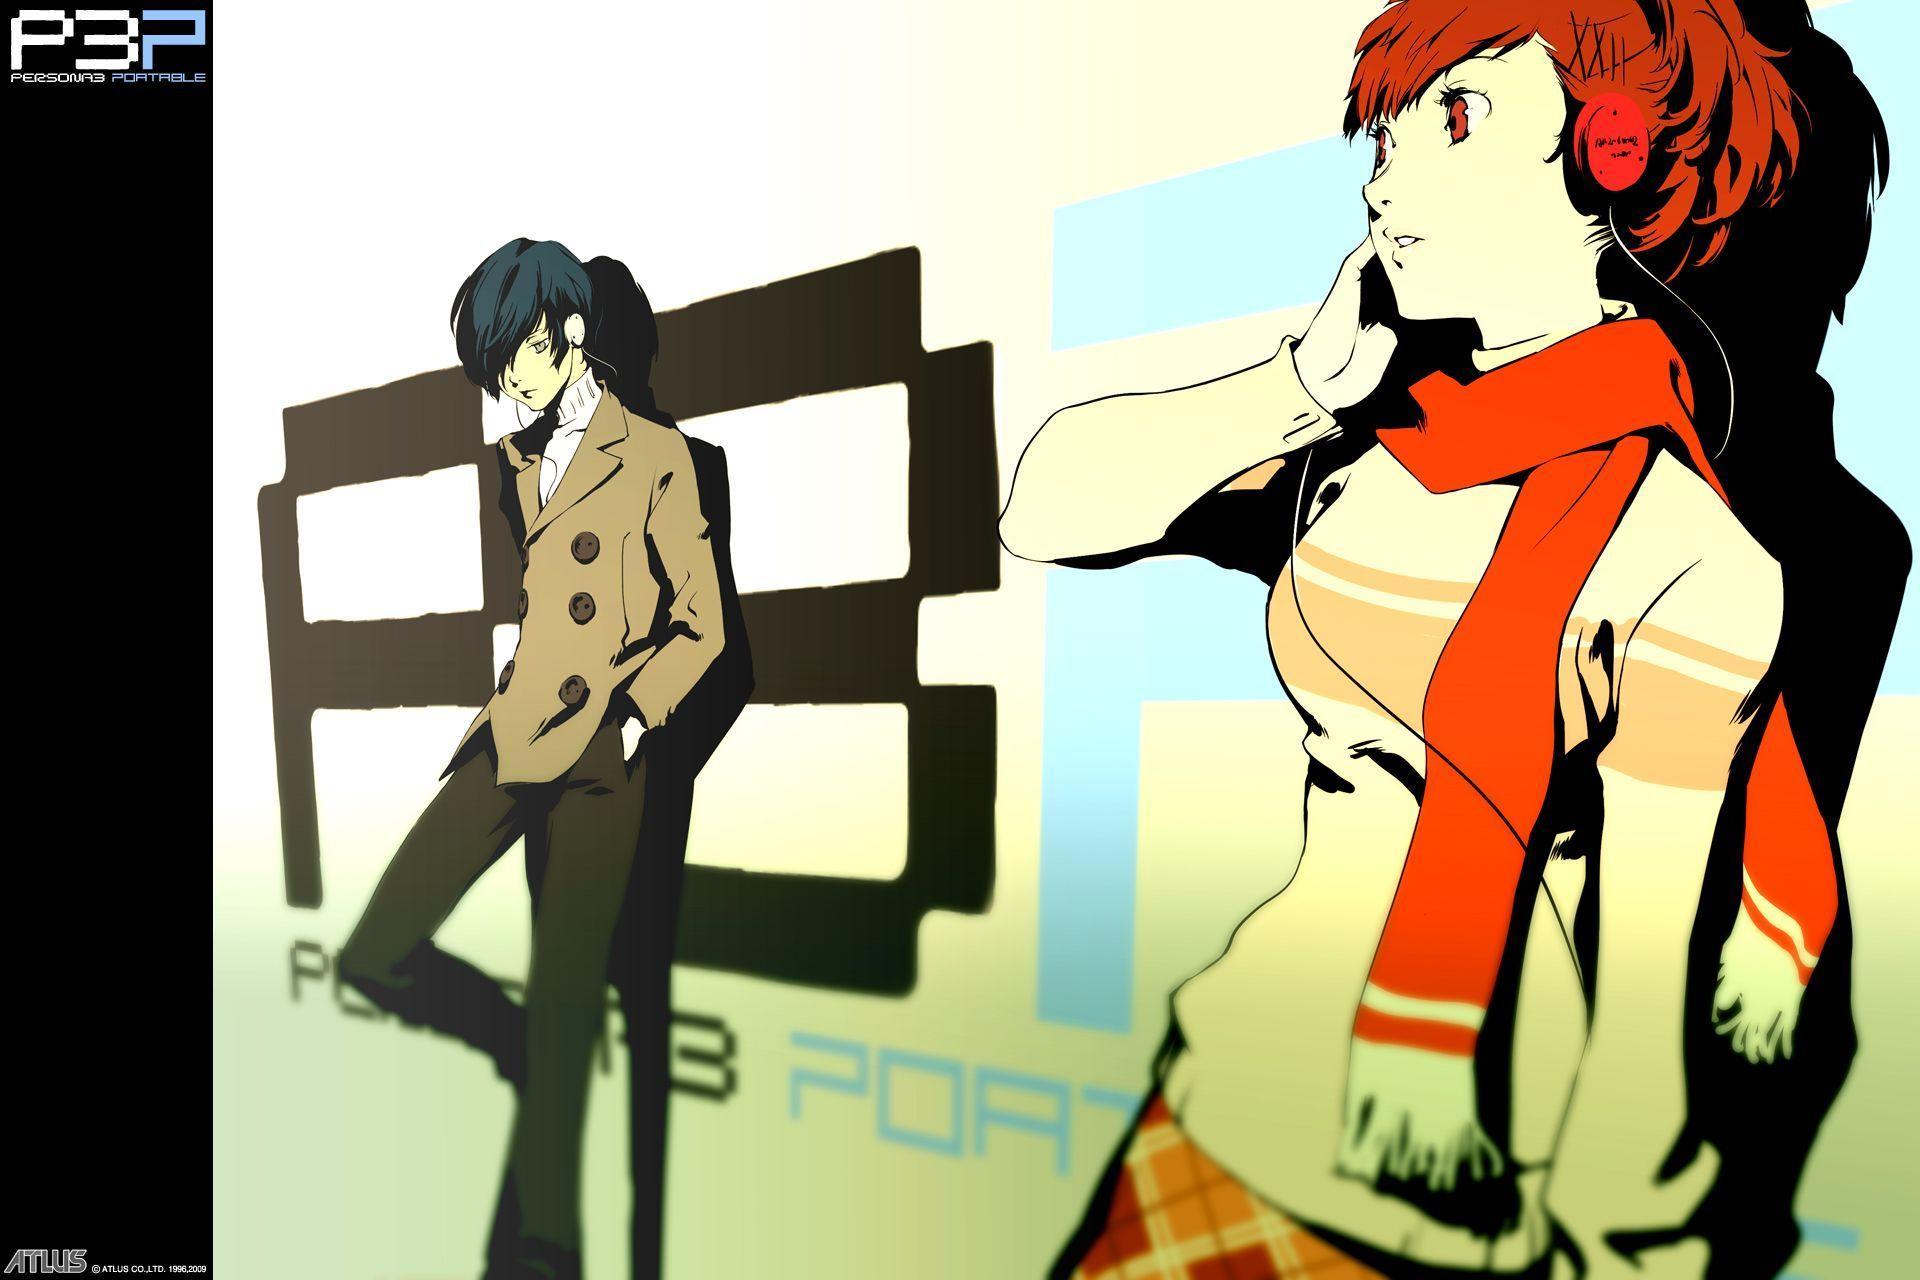 Persona 3 Portable Wallpapers